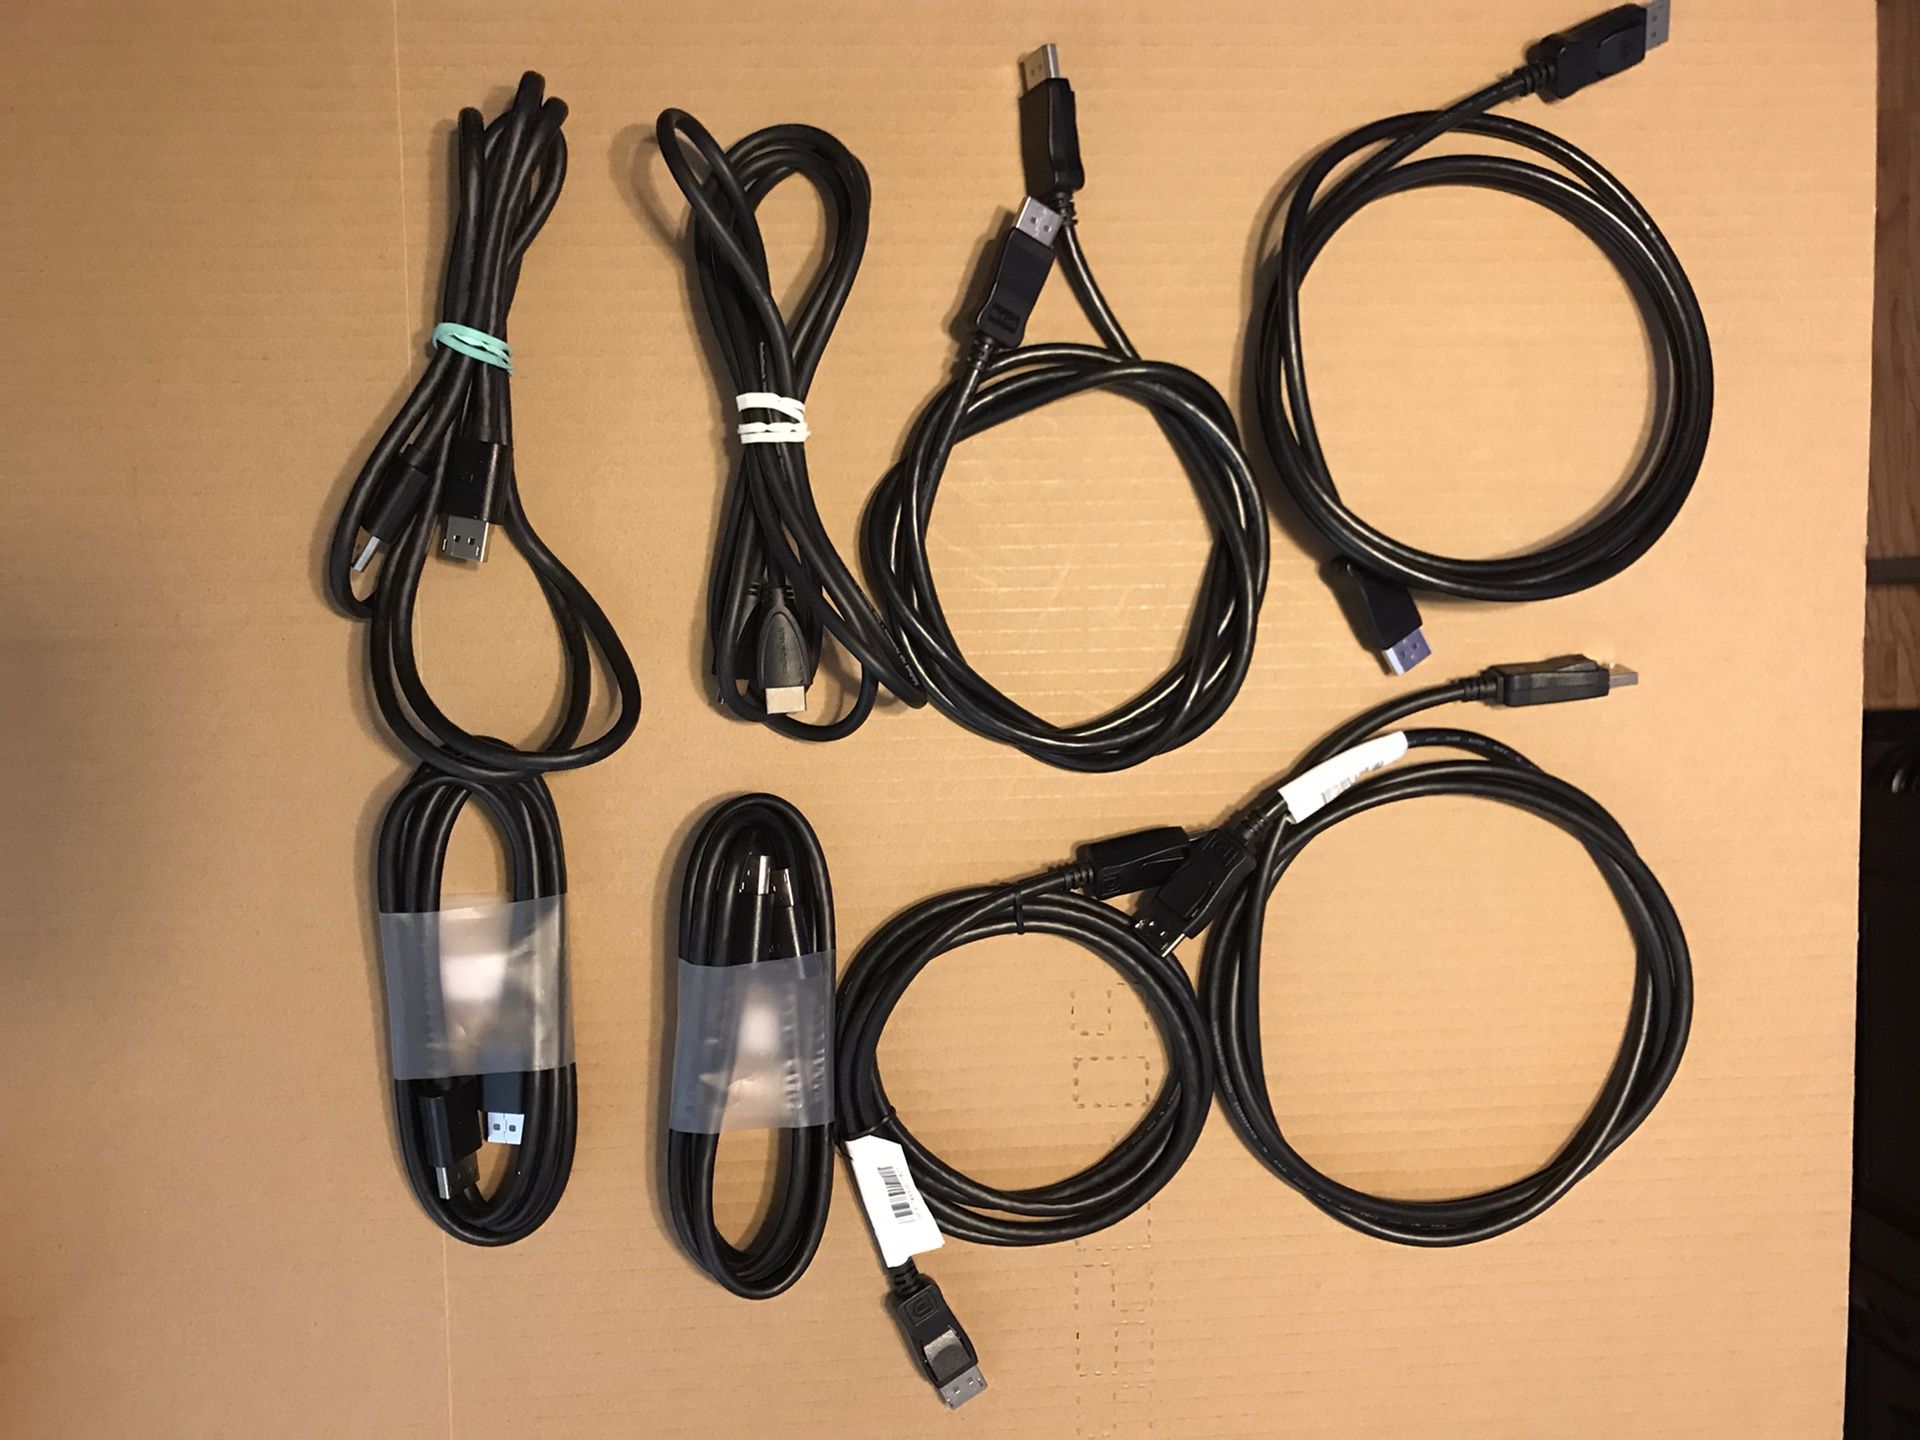 HP Display Port Monitor Cables - Lot of 8